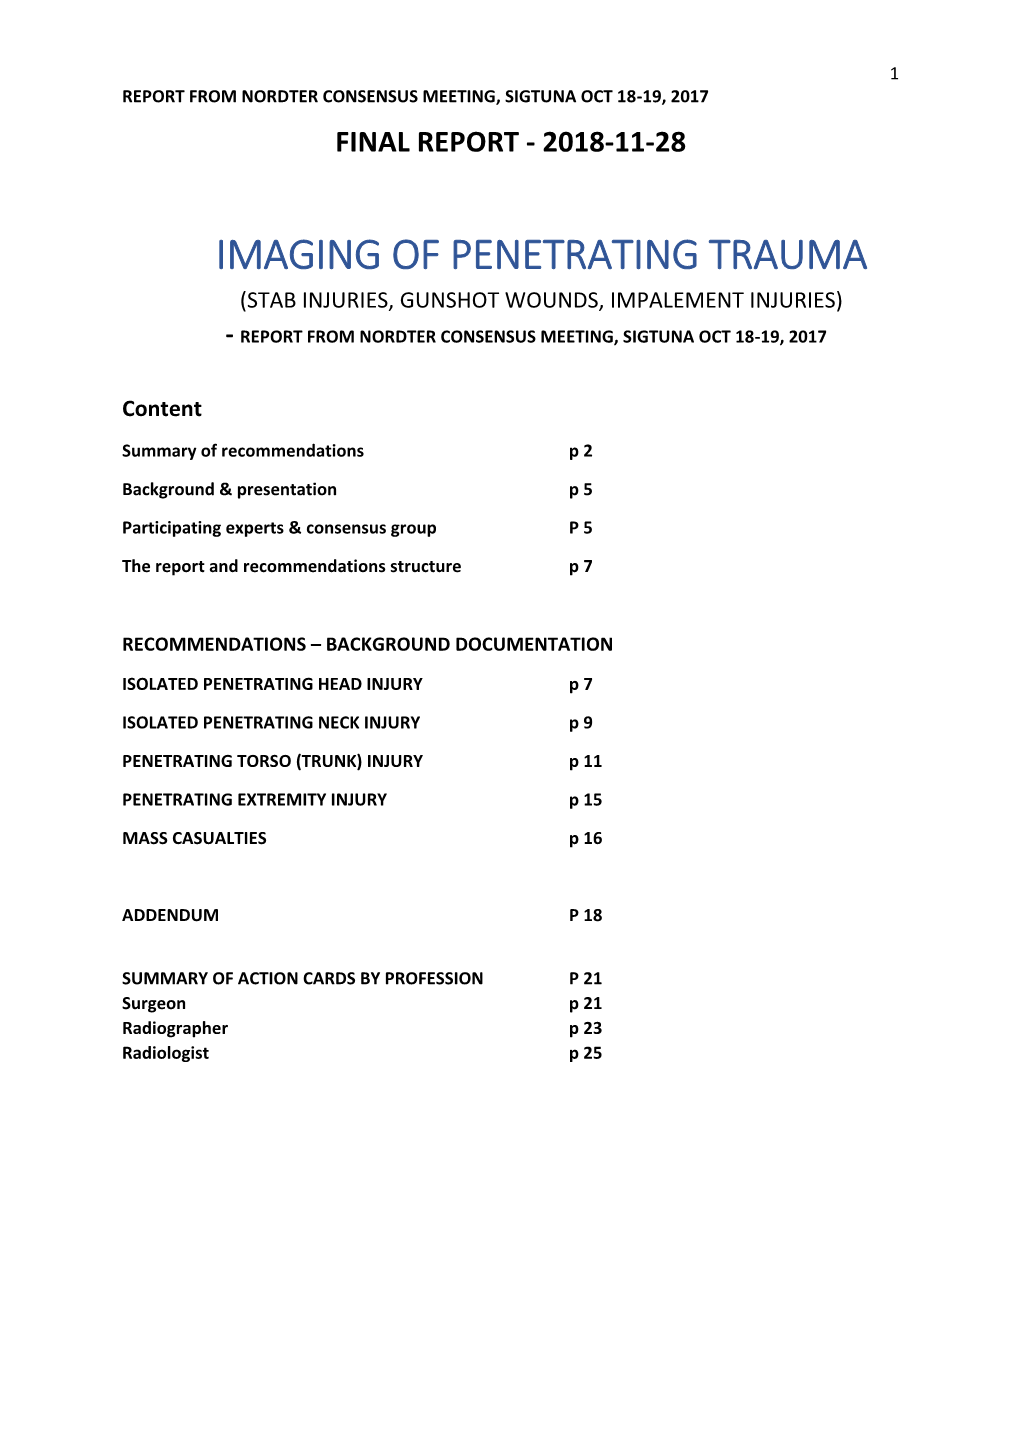 Imaging of Penetrating Trauma (Stab Injuries, Gunshot Wounds, Impalement Injuries) - Report from Nordter Consensus Meeting, Sigtuna Oct 18-19, 2017